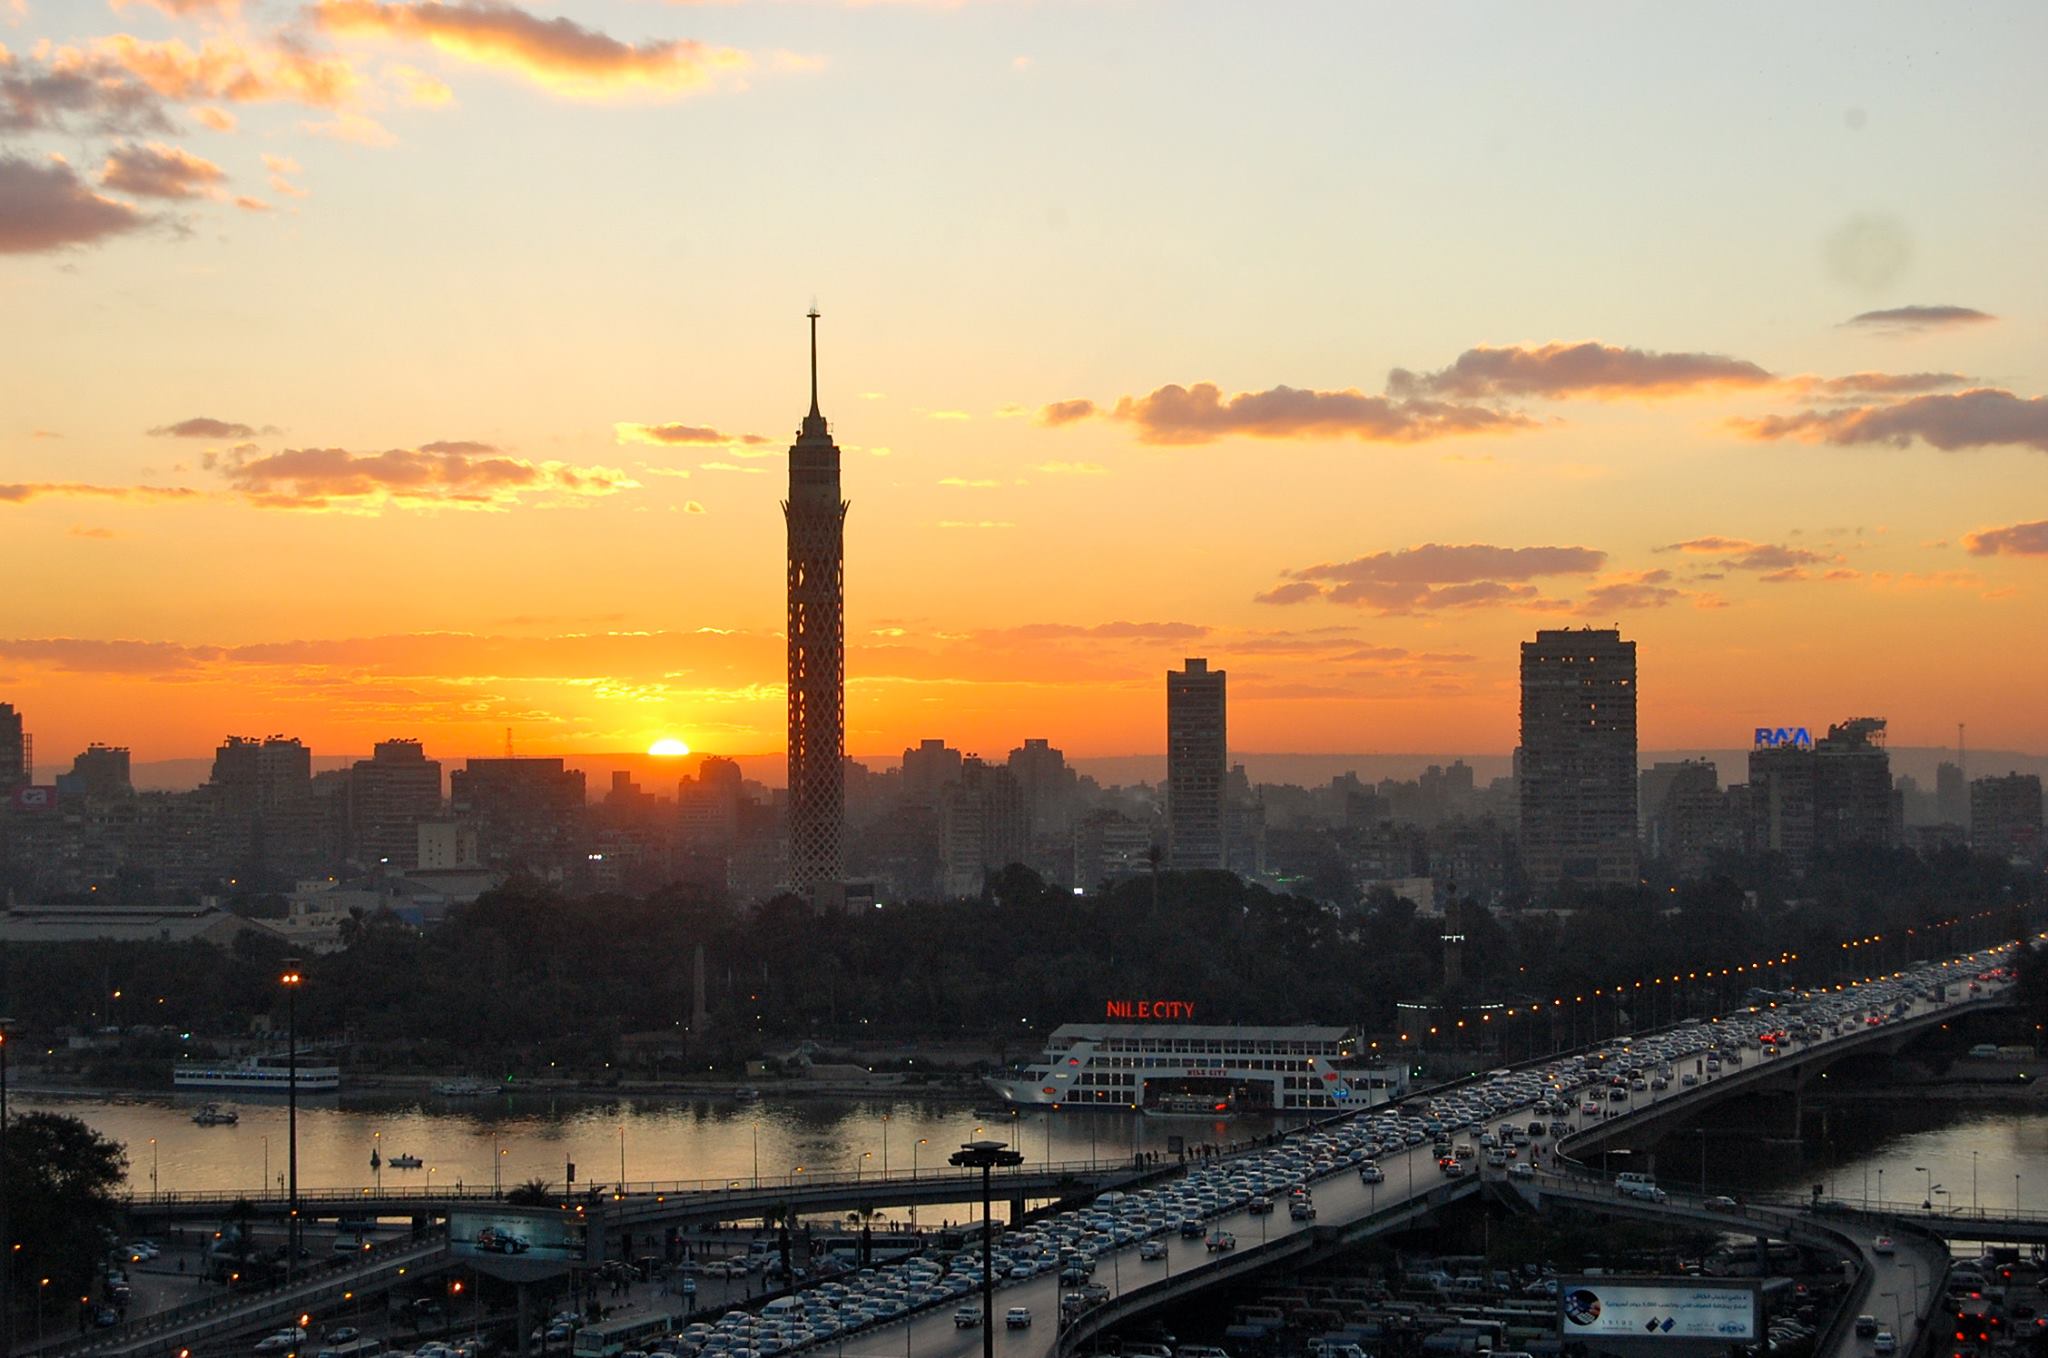 A sunset in Cairo, 2013